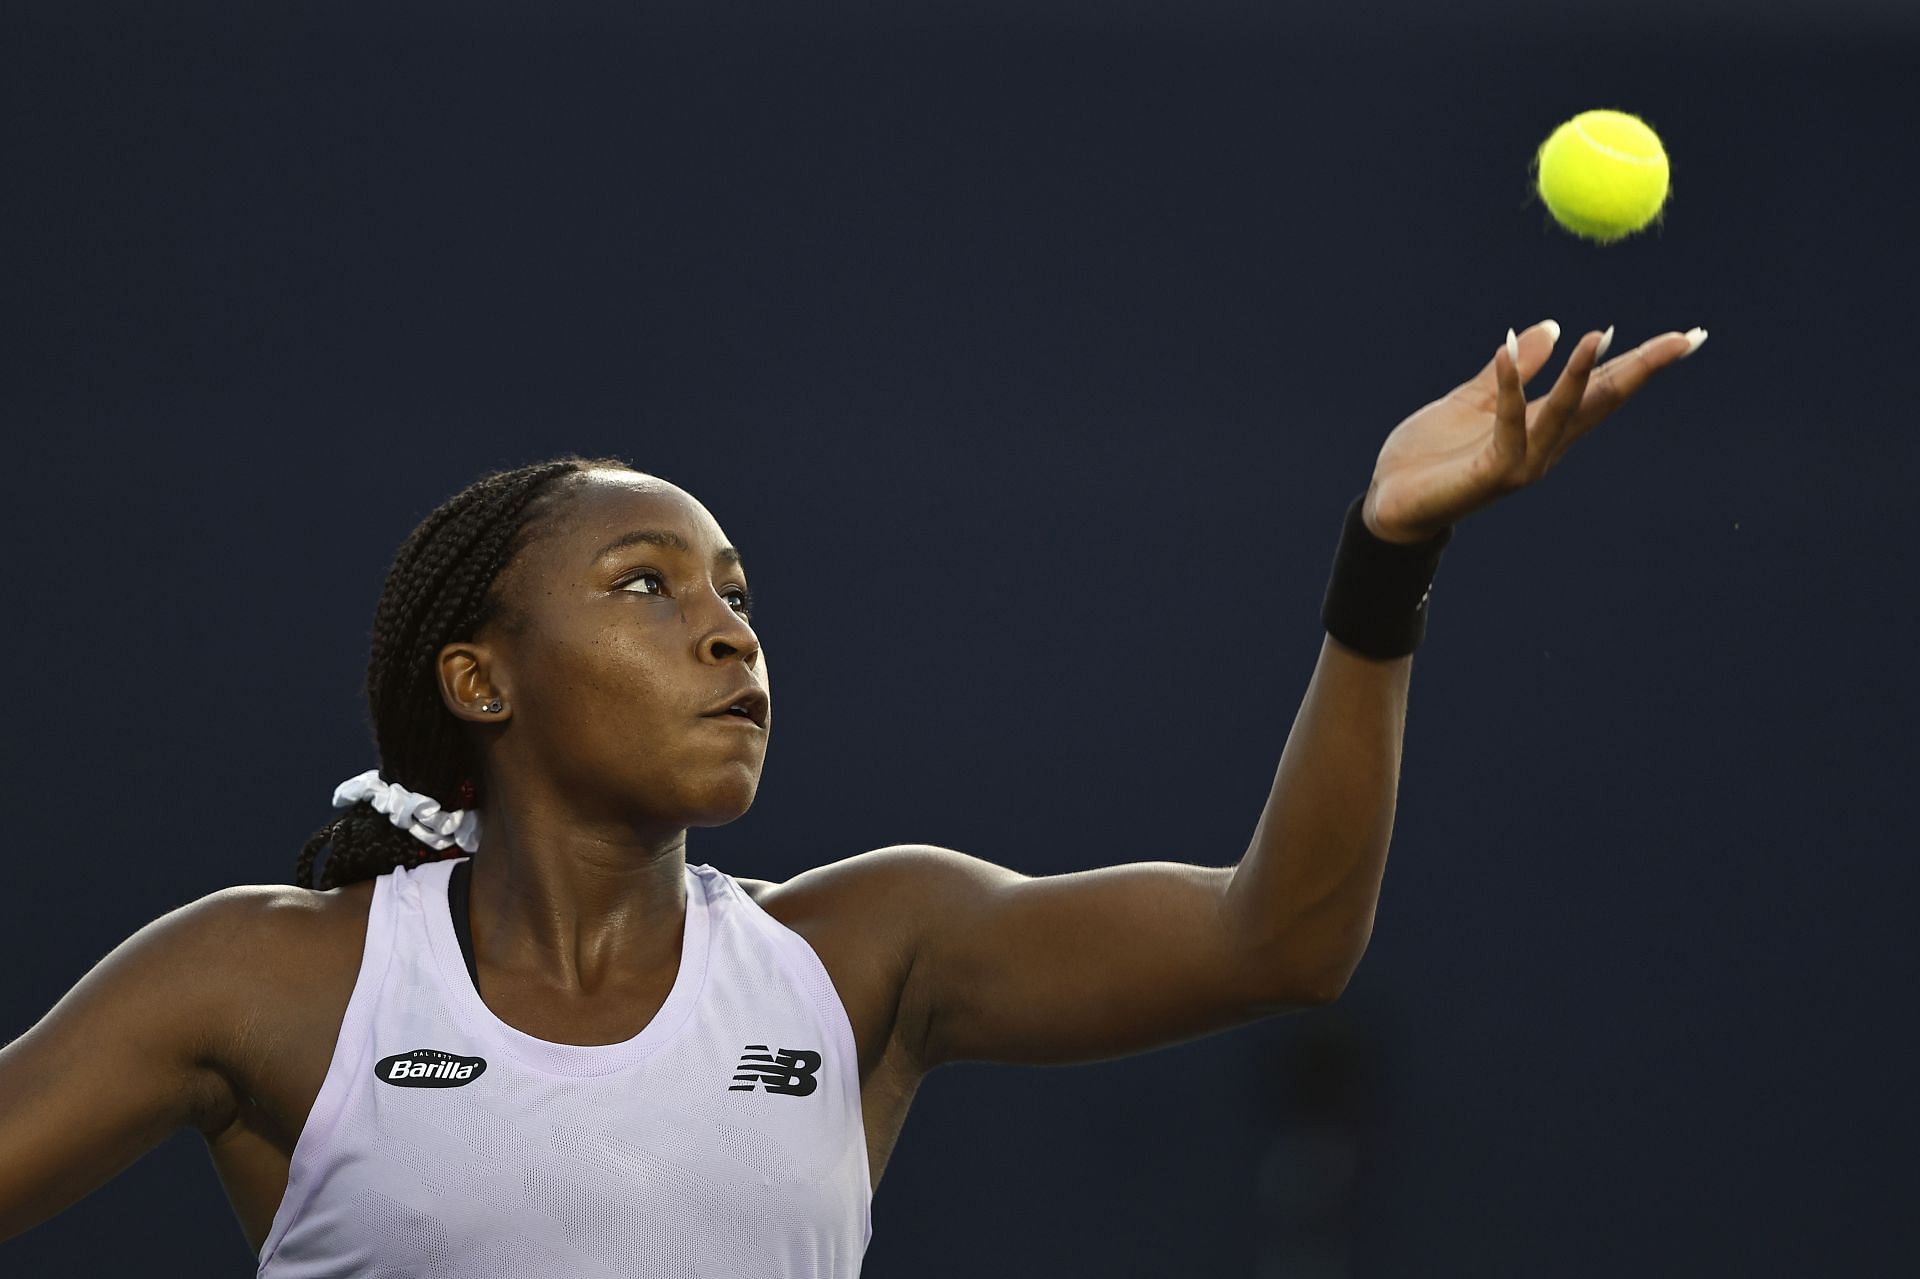 Coco Gauff in action during her doubles match at the San Diego Open